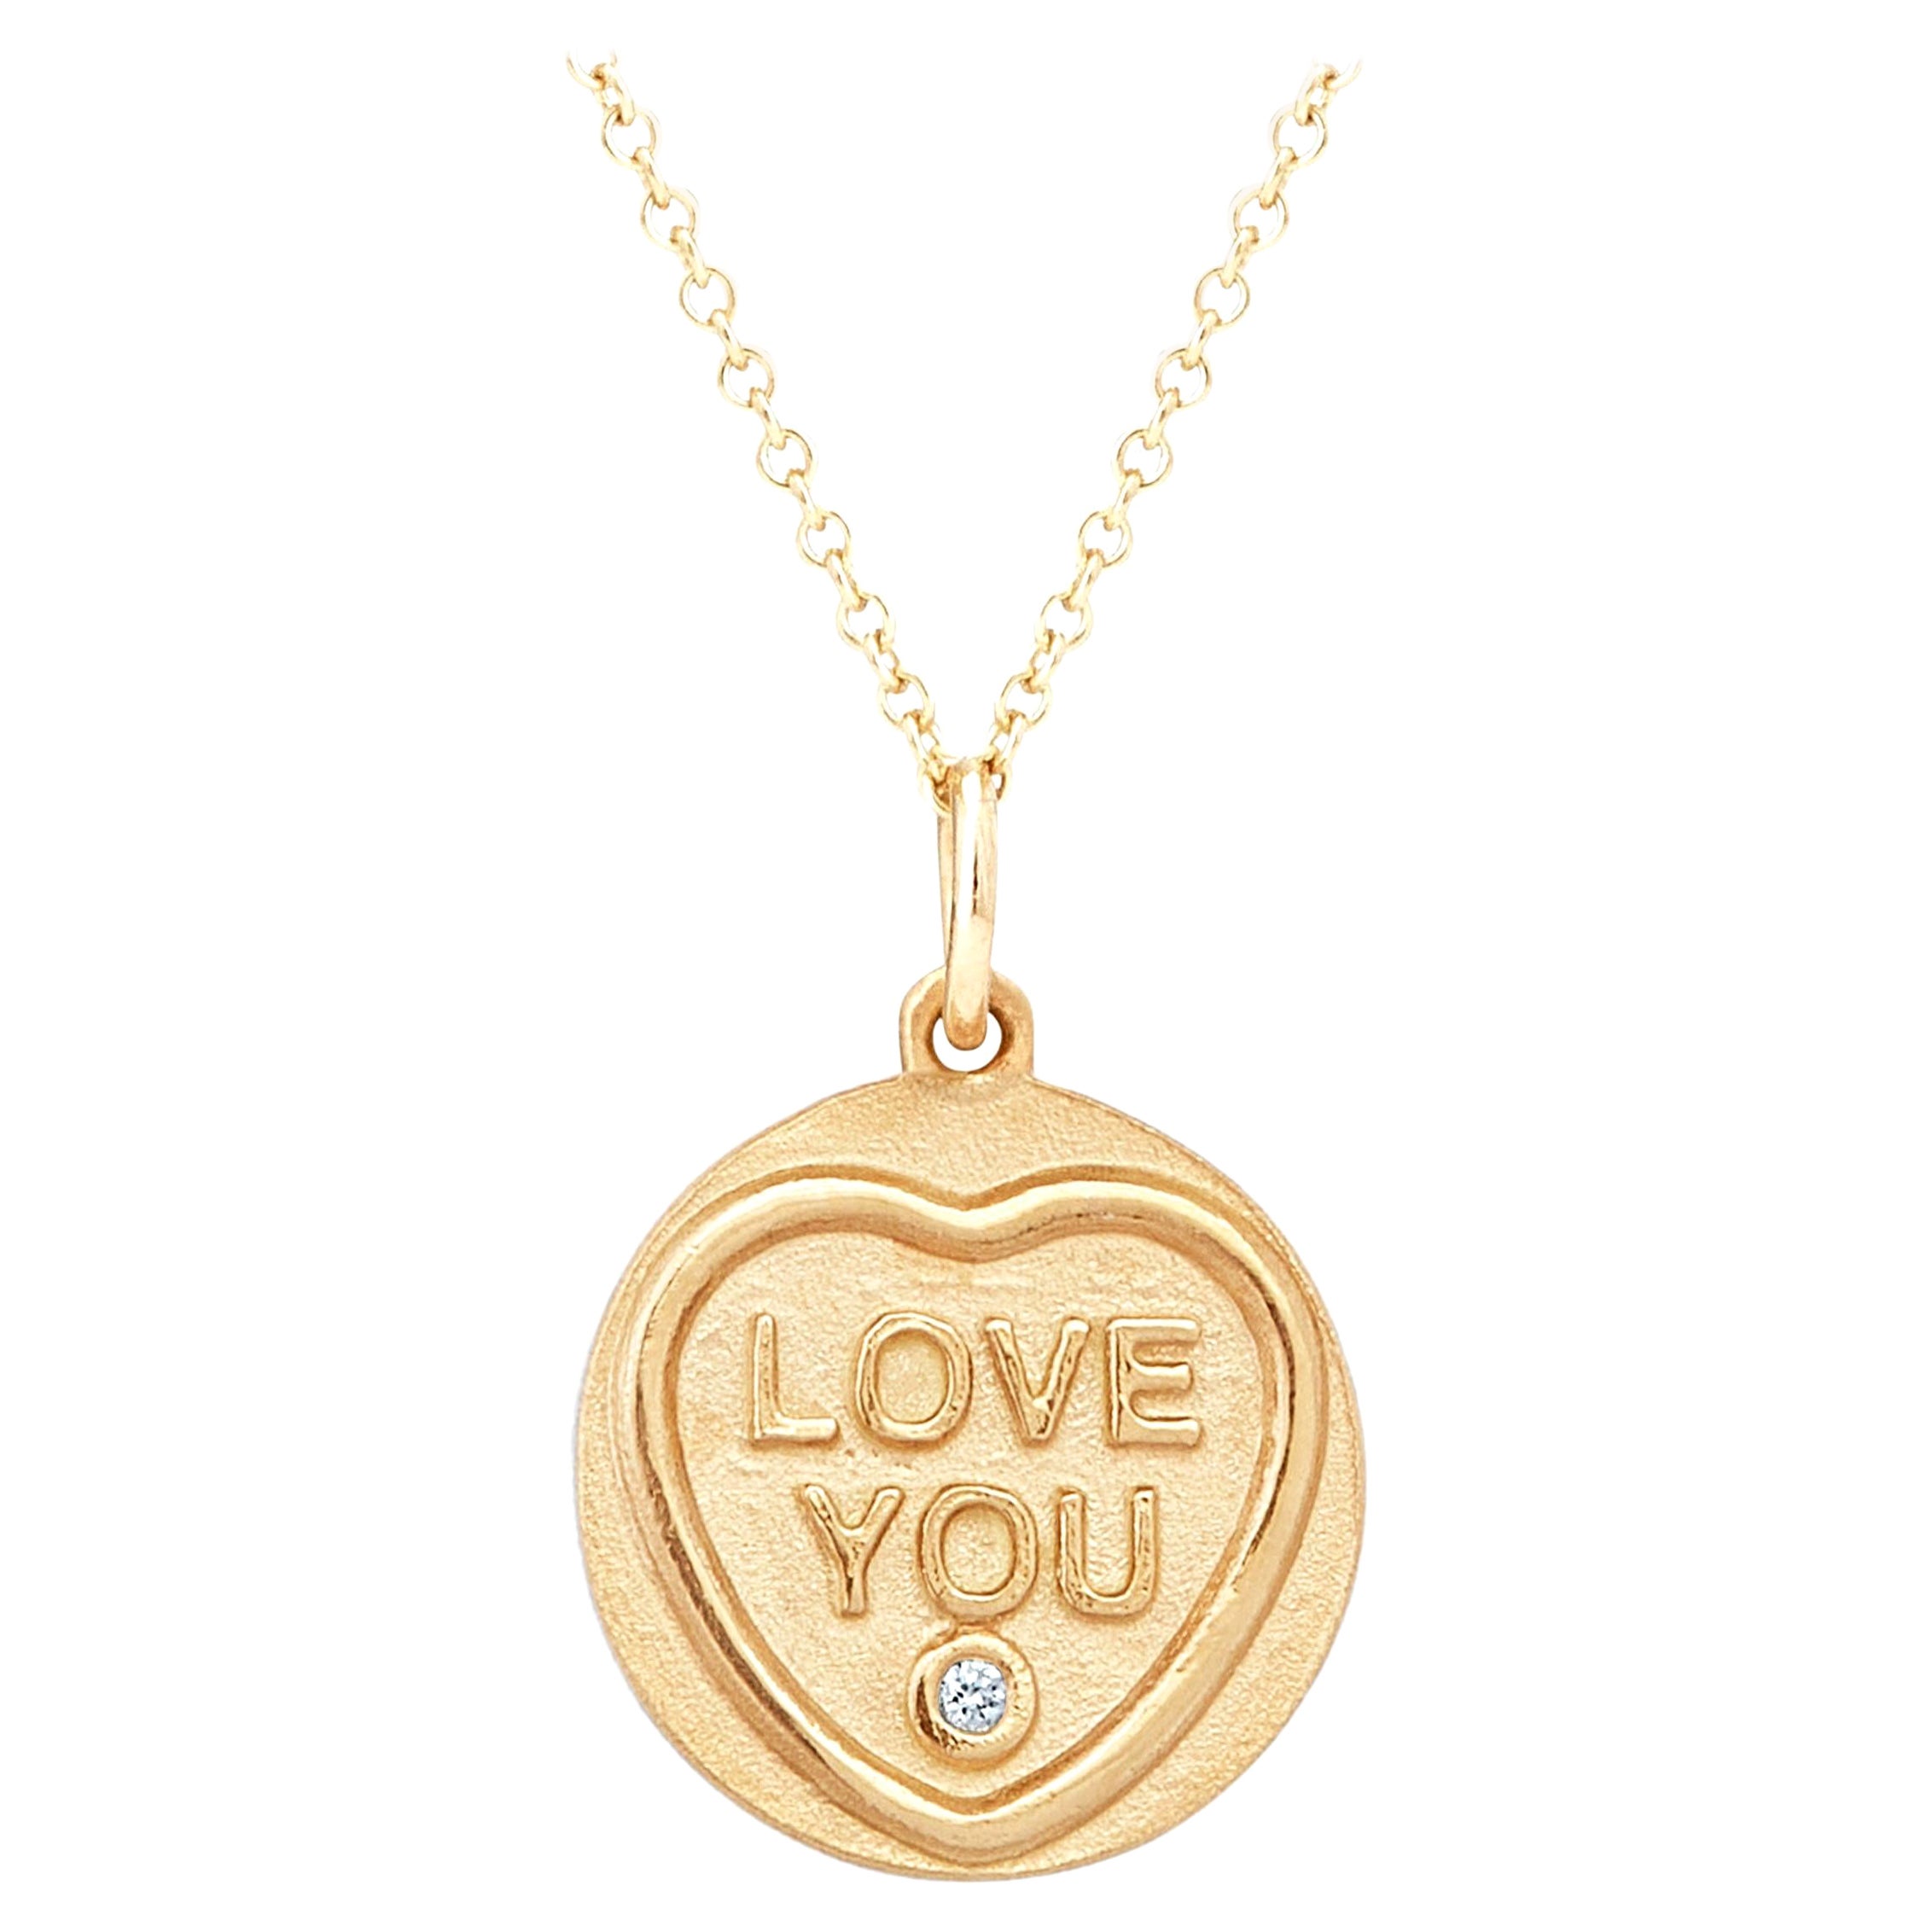 Love Hearts Love You Necklace in 18 Carat Gold and Diamond